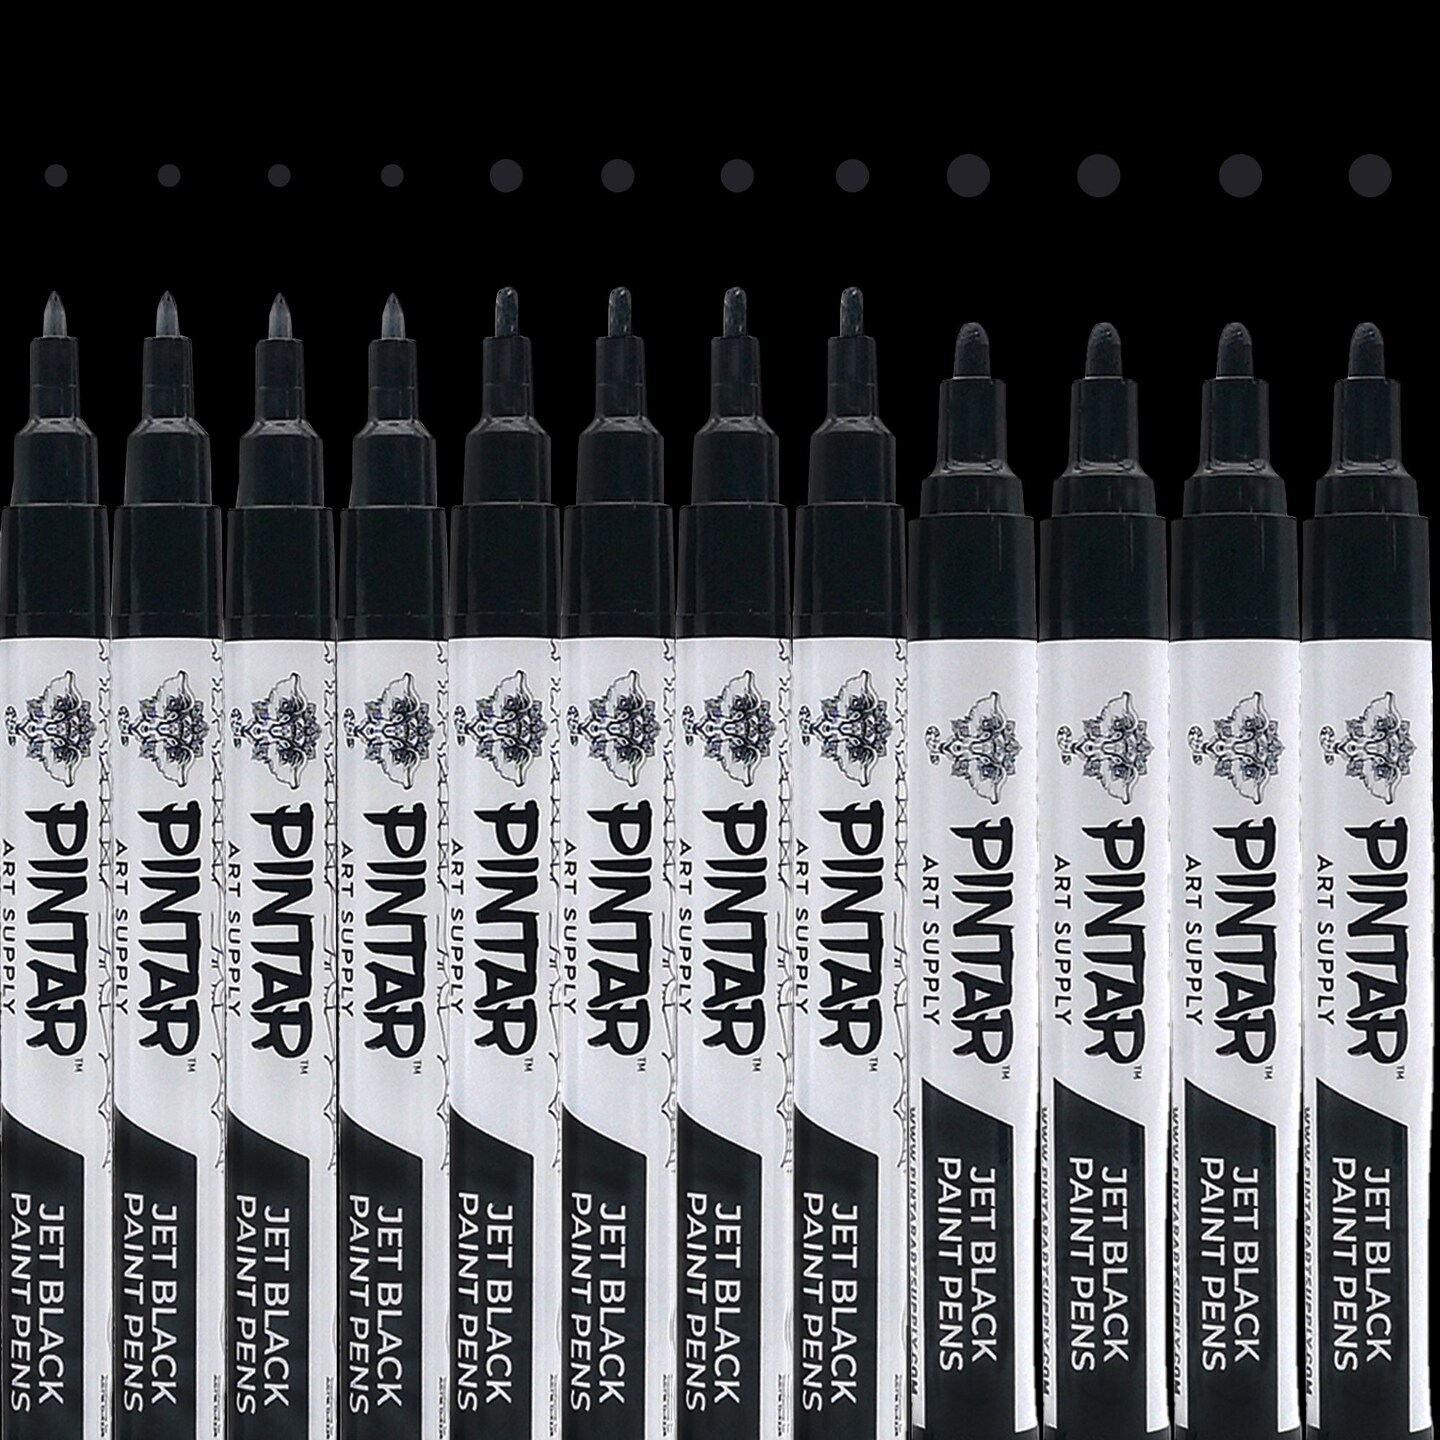 PINTAR Premium Acrylic Paint Pens - Set of 12 Black (4) 0.7mm, (4) 1.0mm, (4) 5.0mm Tips - Smooth-Flowing Japanese Ink - Crafting, Coloring, Drawing, Lettering, Writing Supplies